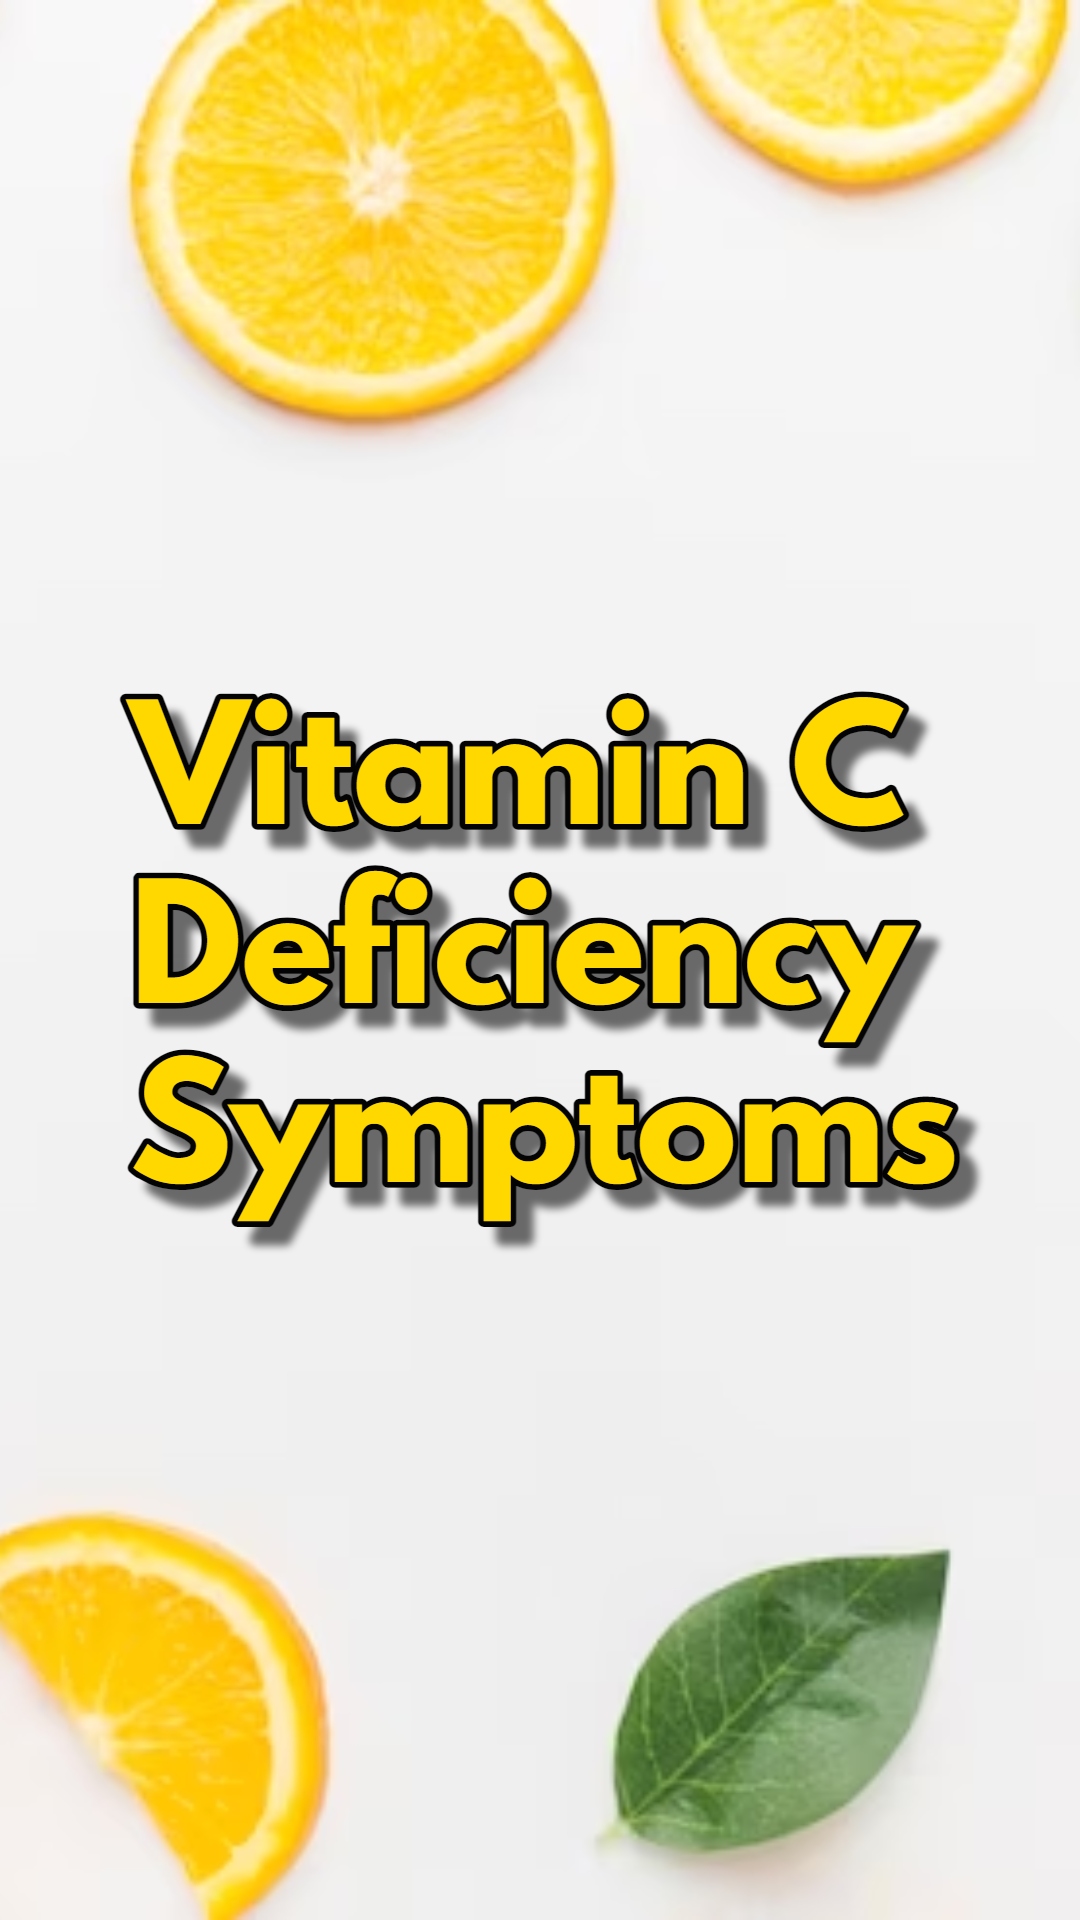 Vitamin C Deficiency Symptoms What Are The Warning Signs You Should Be